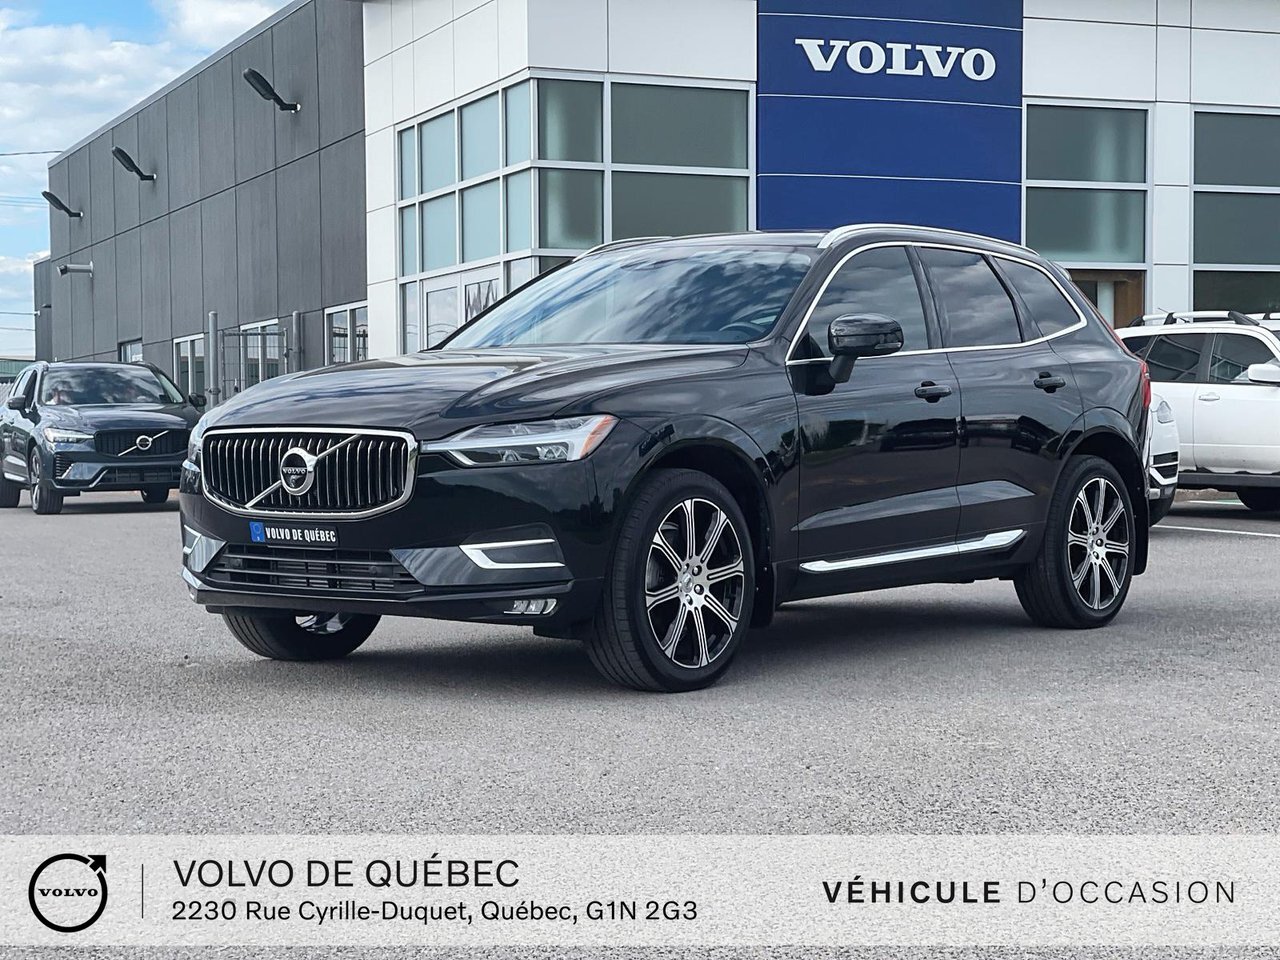 2021 Volvo XC60 T6 AWD Inscription - Bowers and Wilkins 